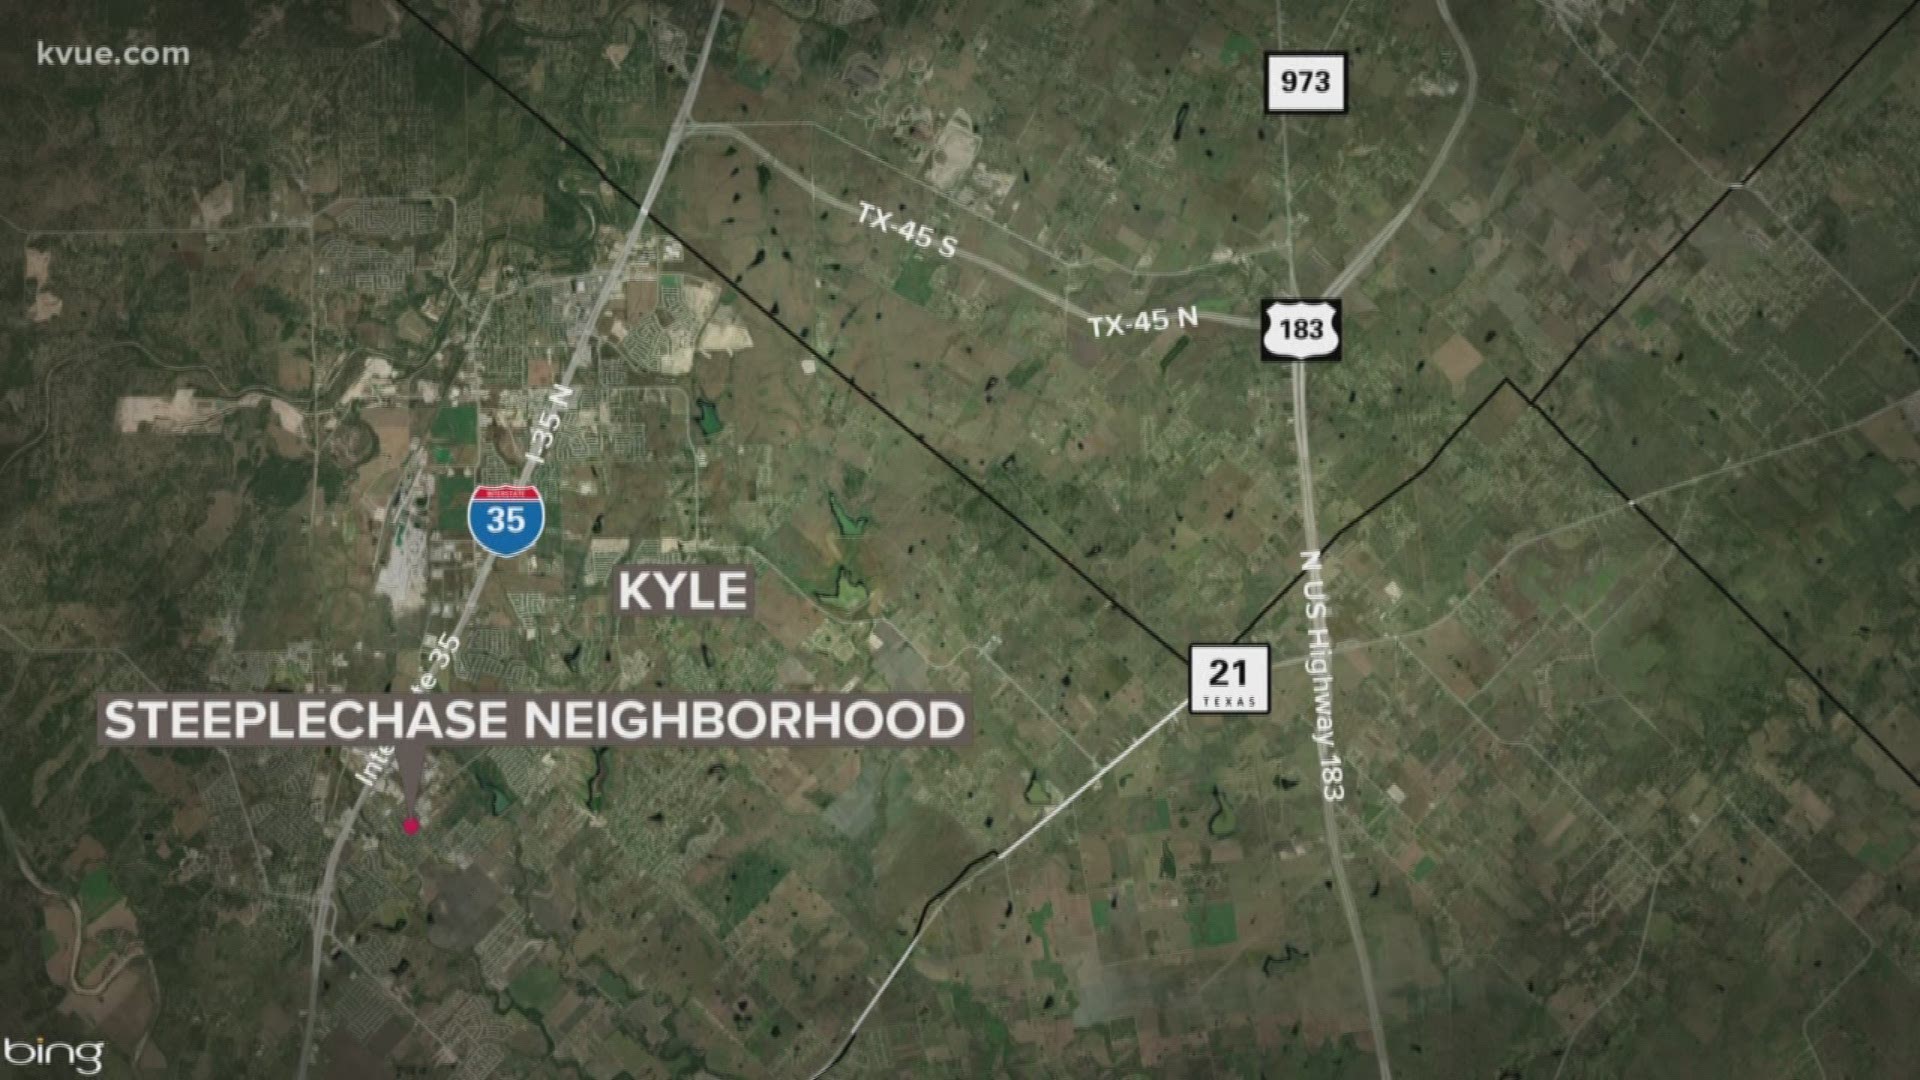 Police in Kyle are investigating what may have been an attempted robbery.